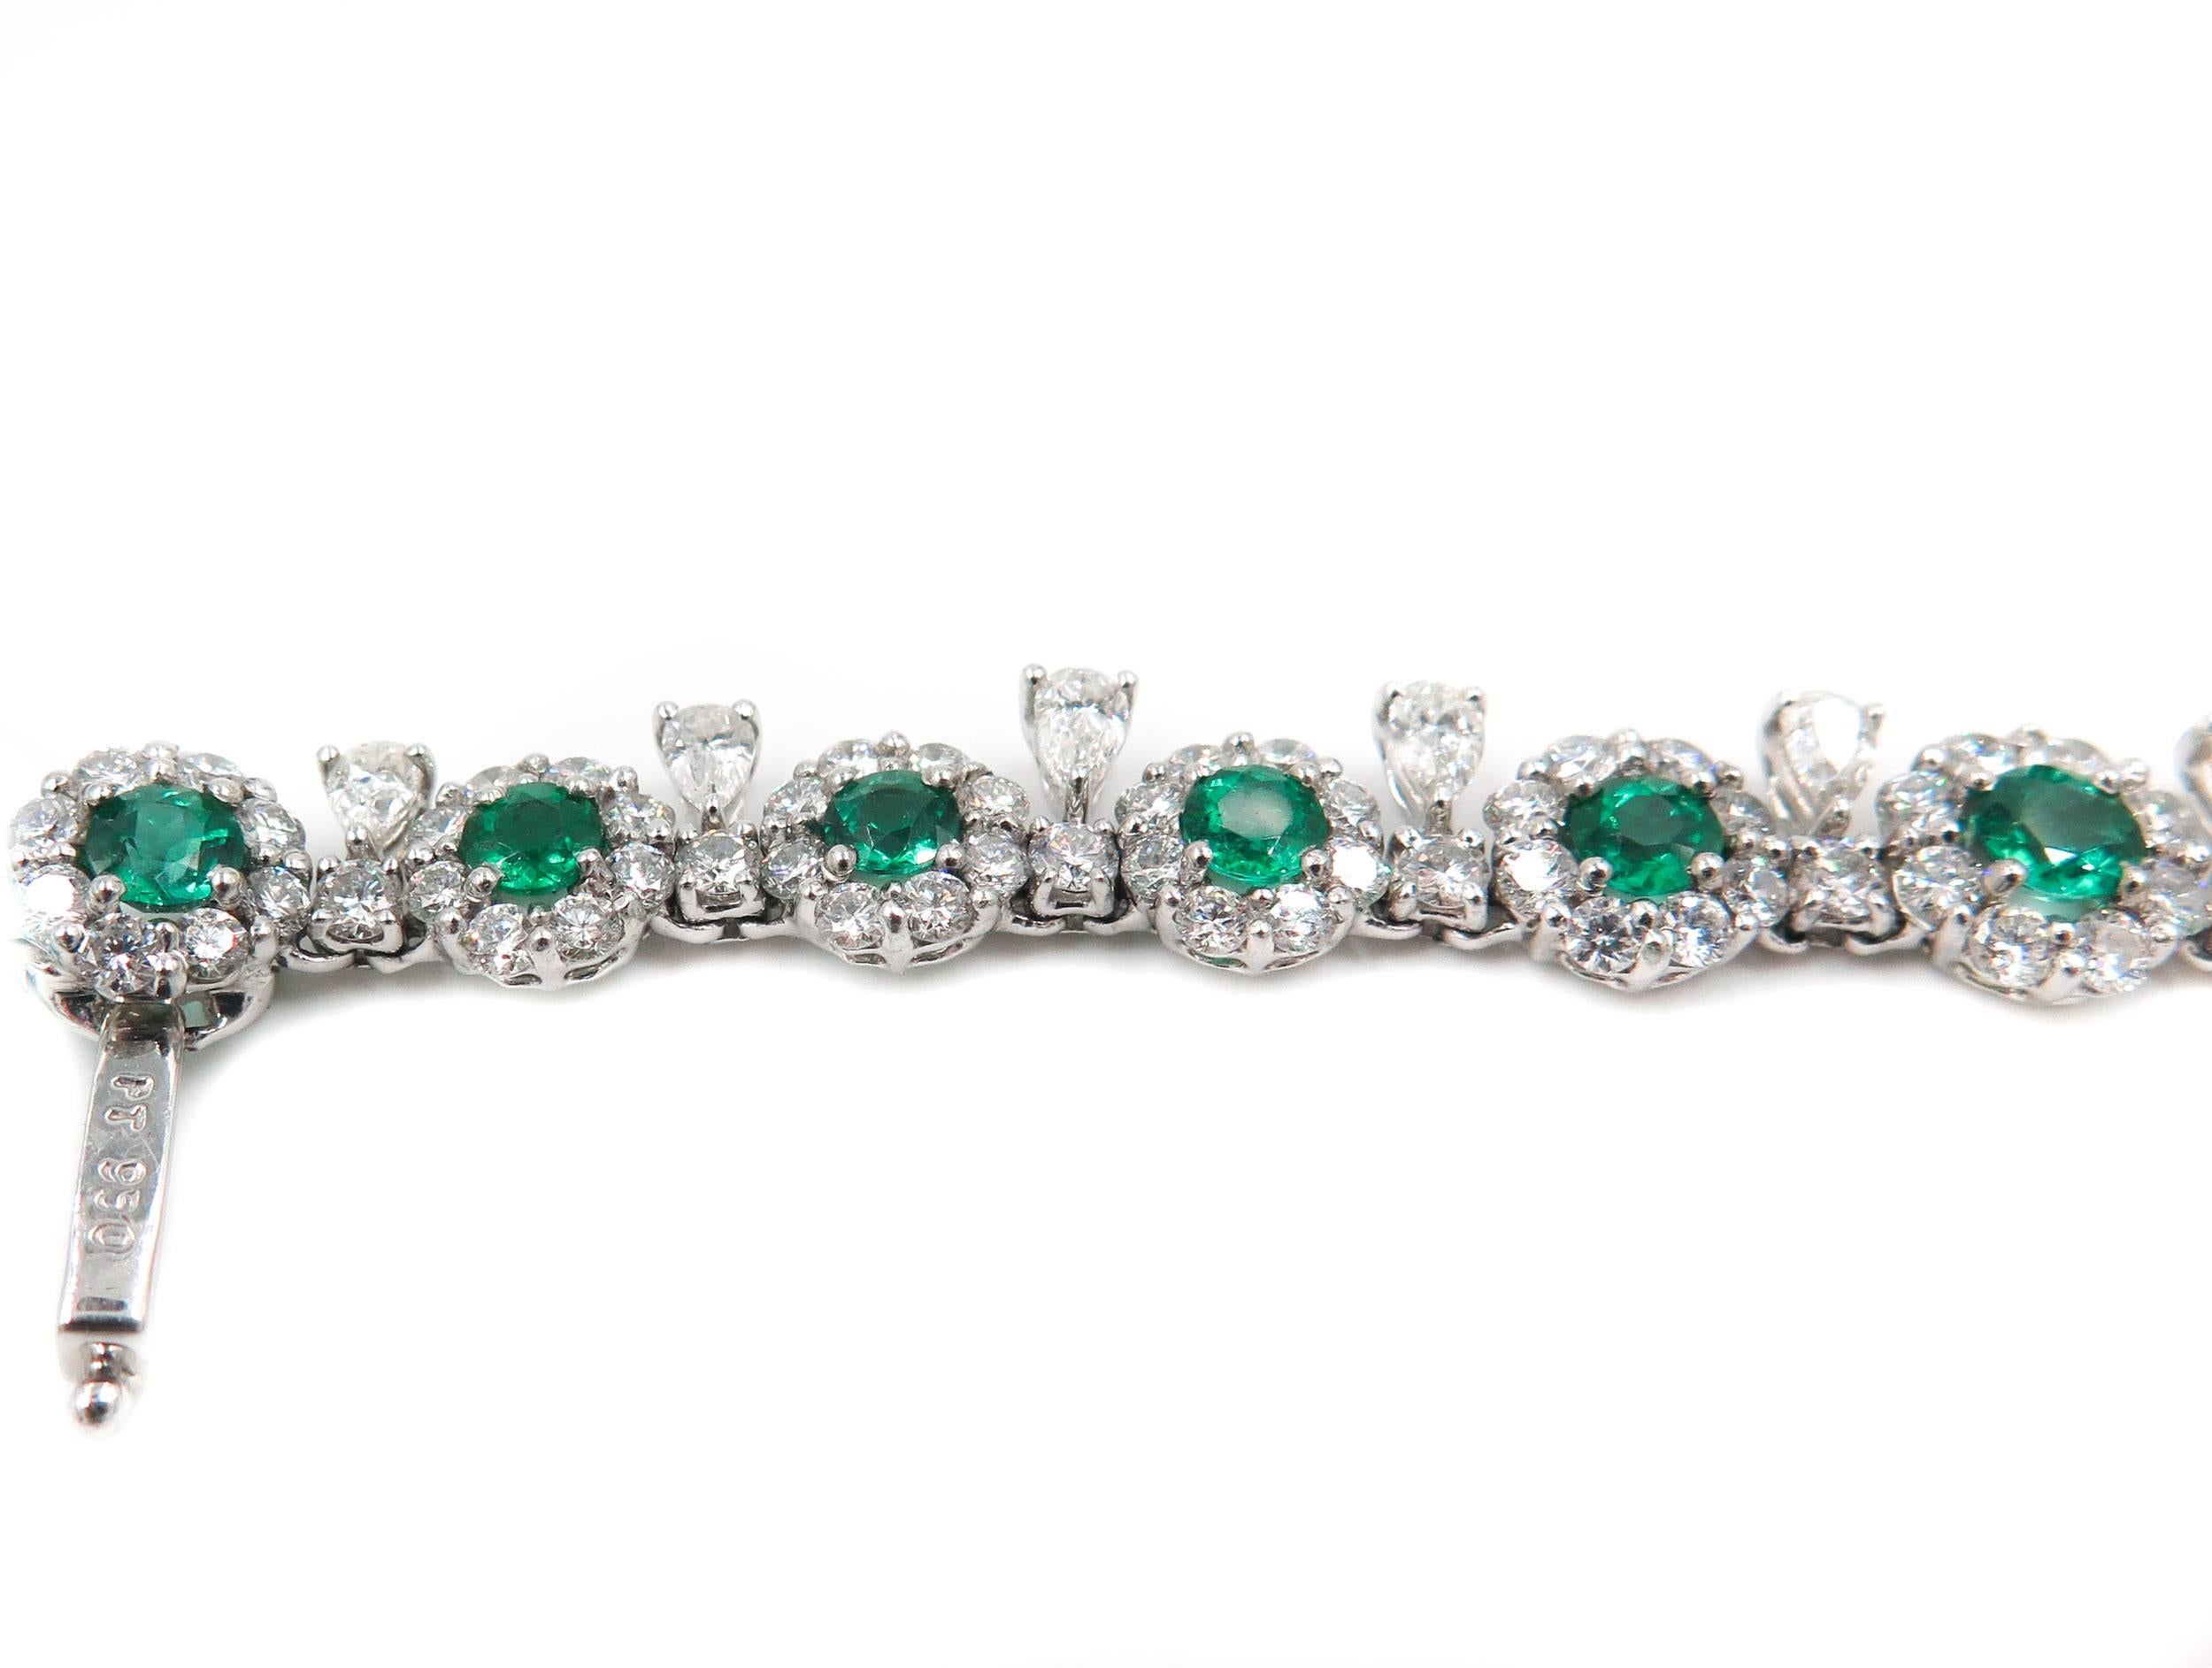 Neoclassical Emerald and Diamond Necklace